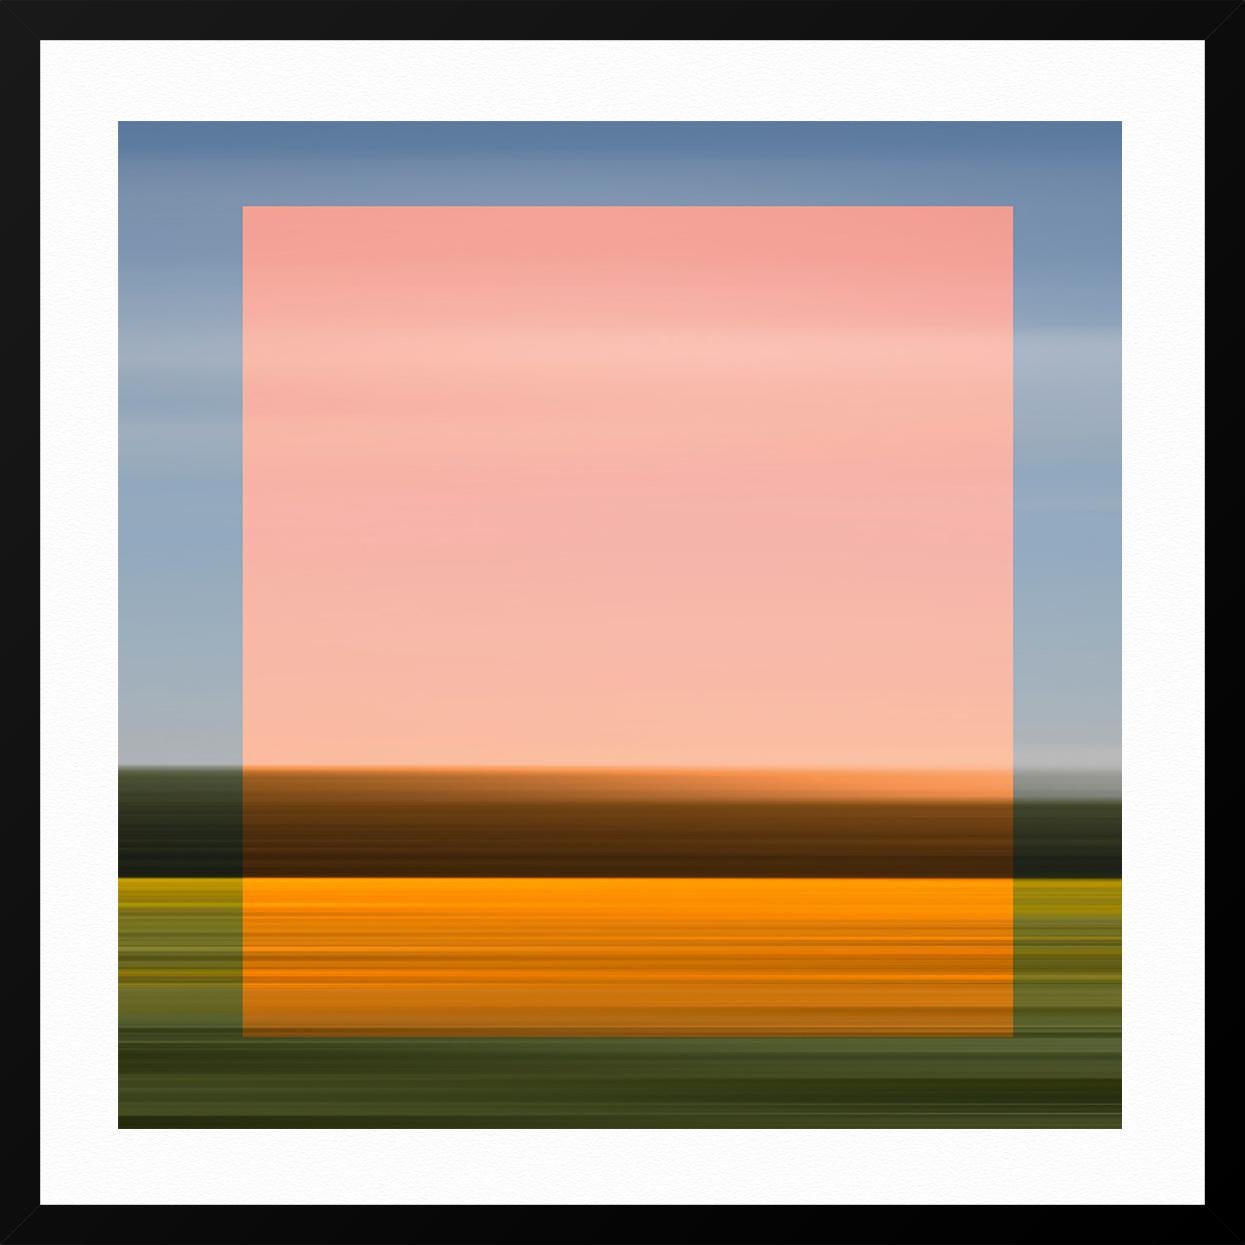 Sunset 1 - Beige Abstract Photograph by Igor Vitomirov